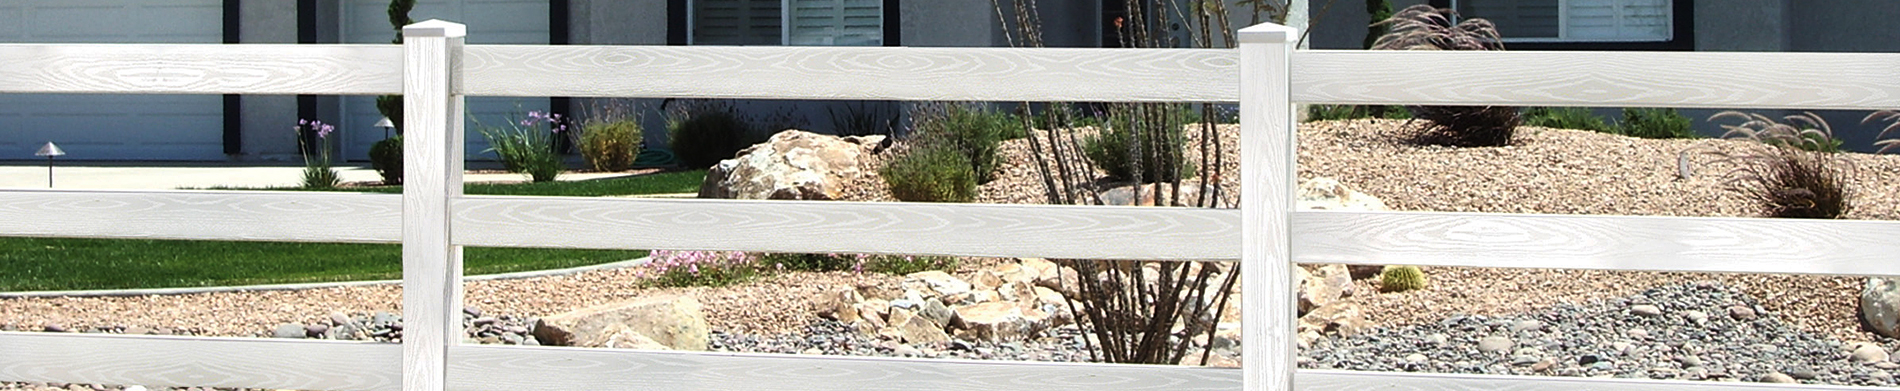 Ranch Fences Makes Your Home Secure Without Blocking The View